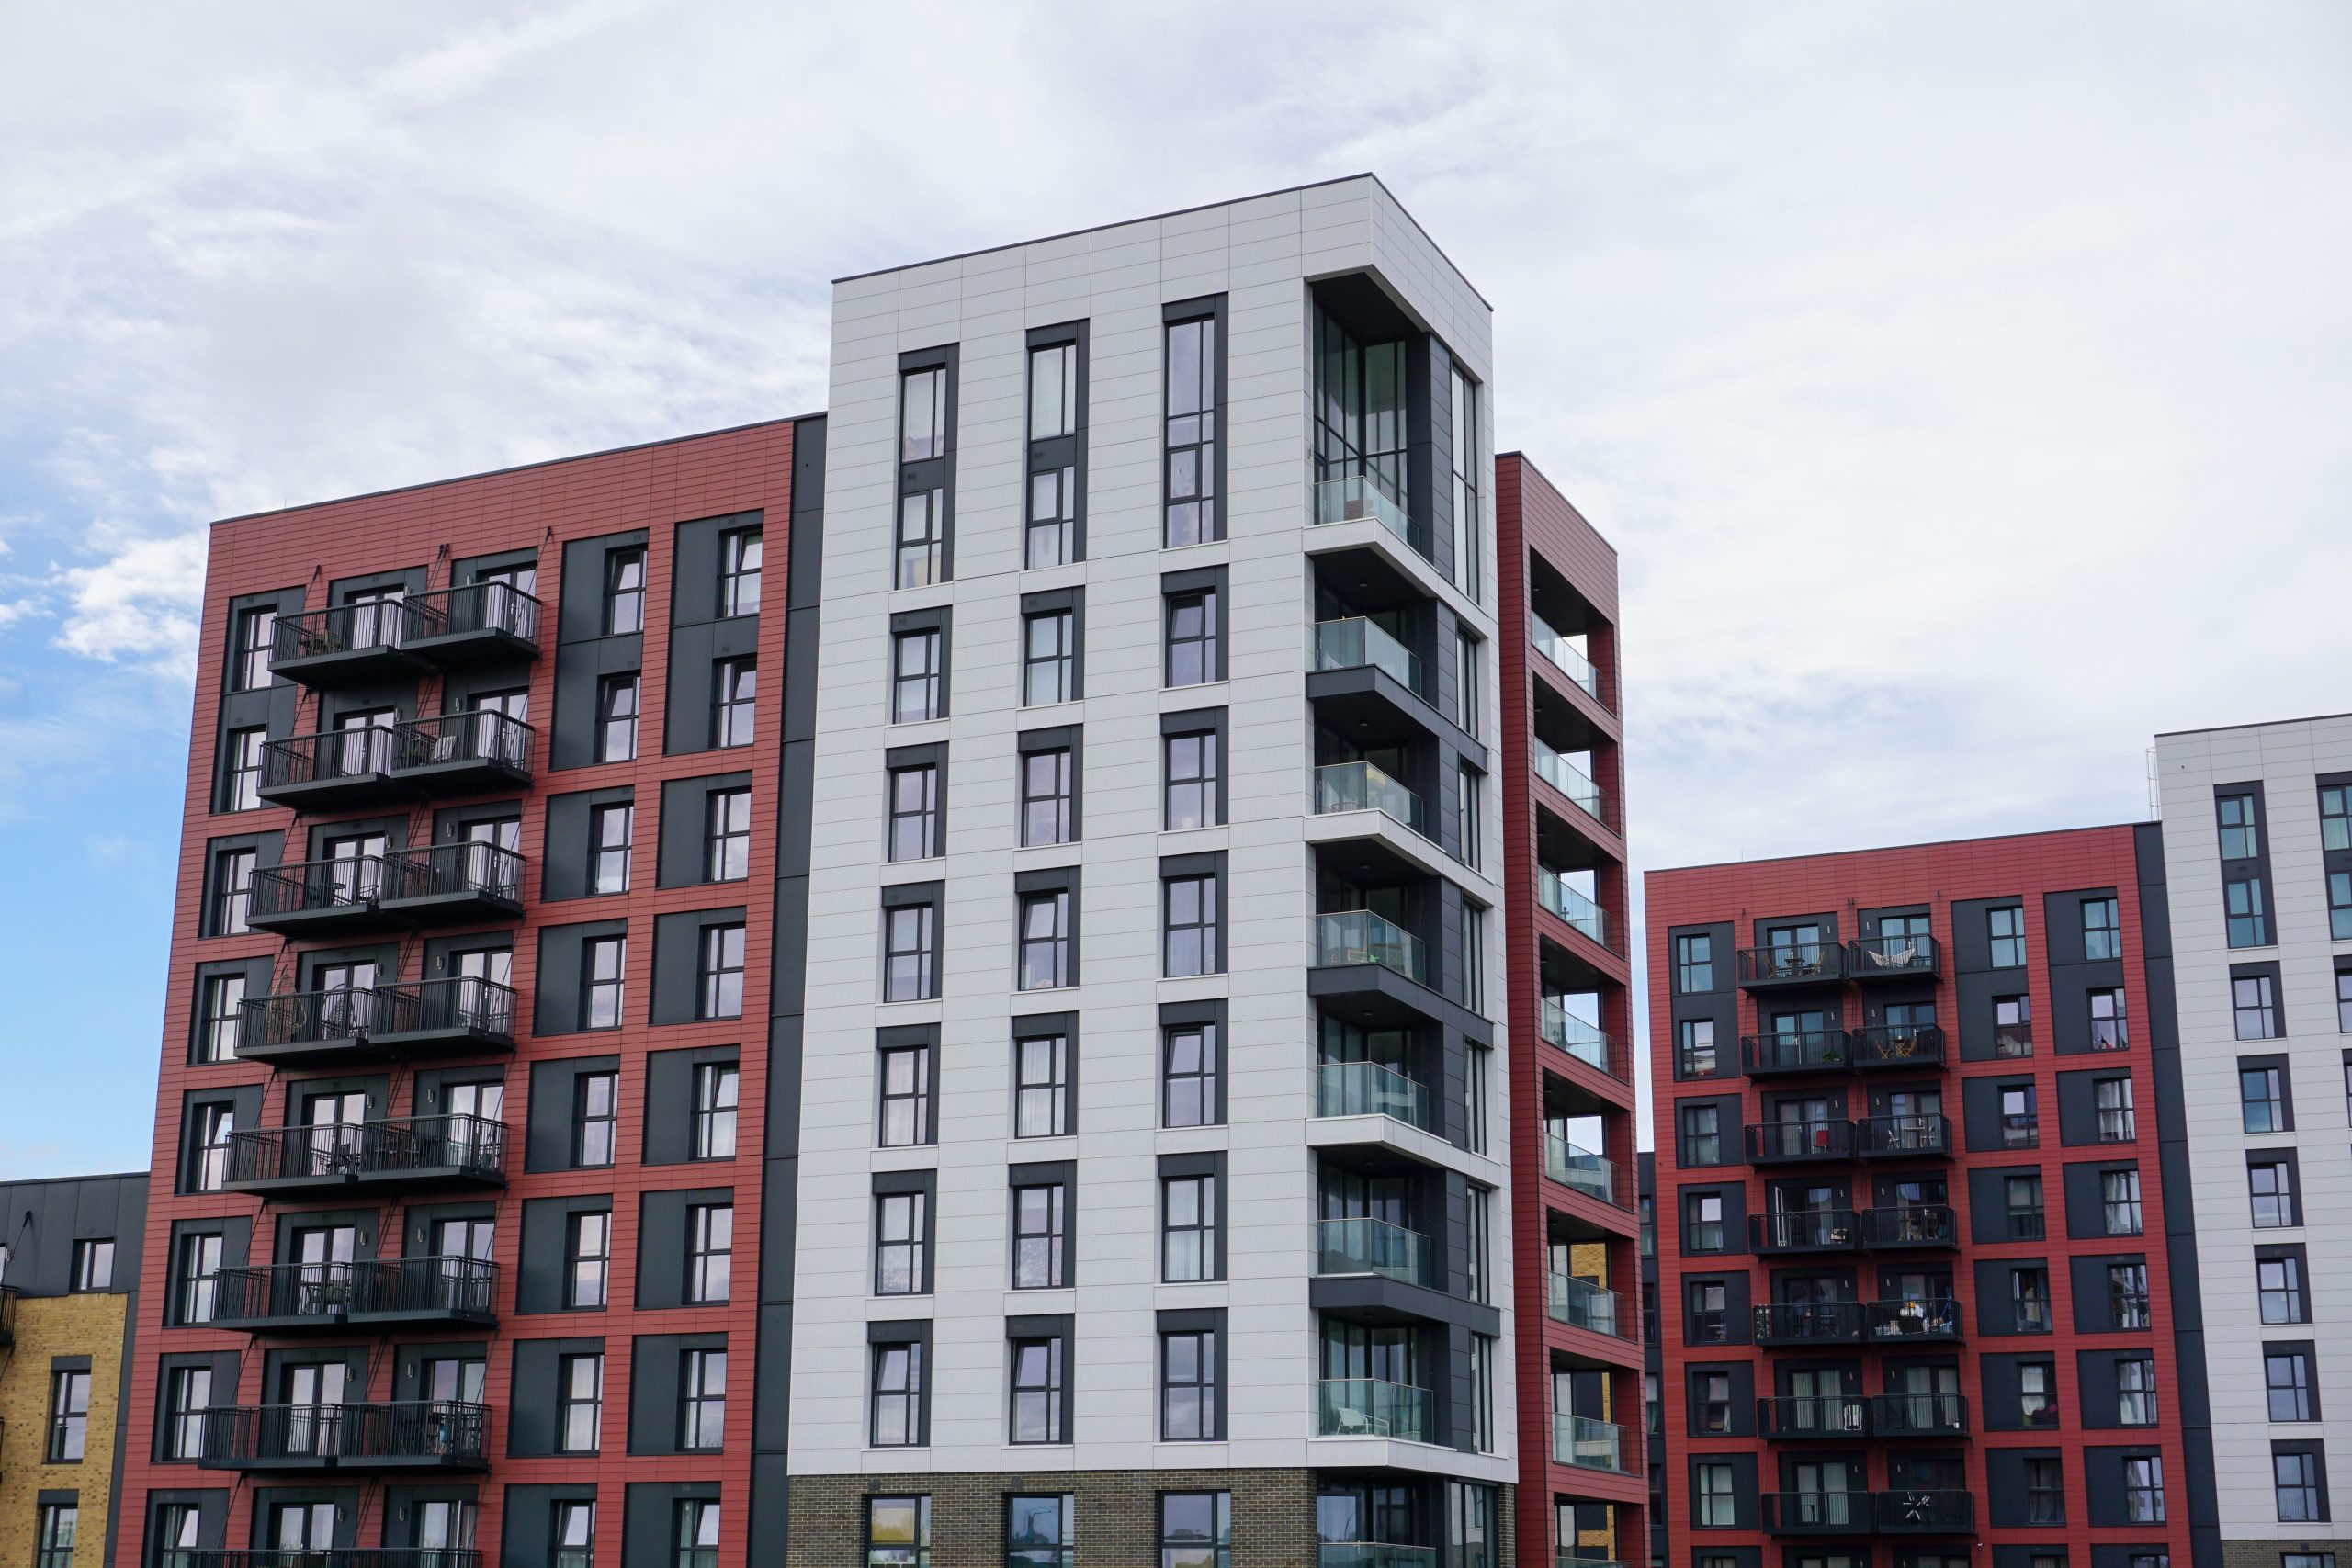 Brent to Expand on Tower Block Housing Projects